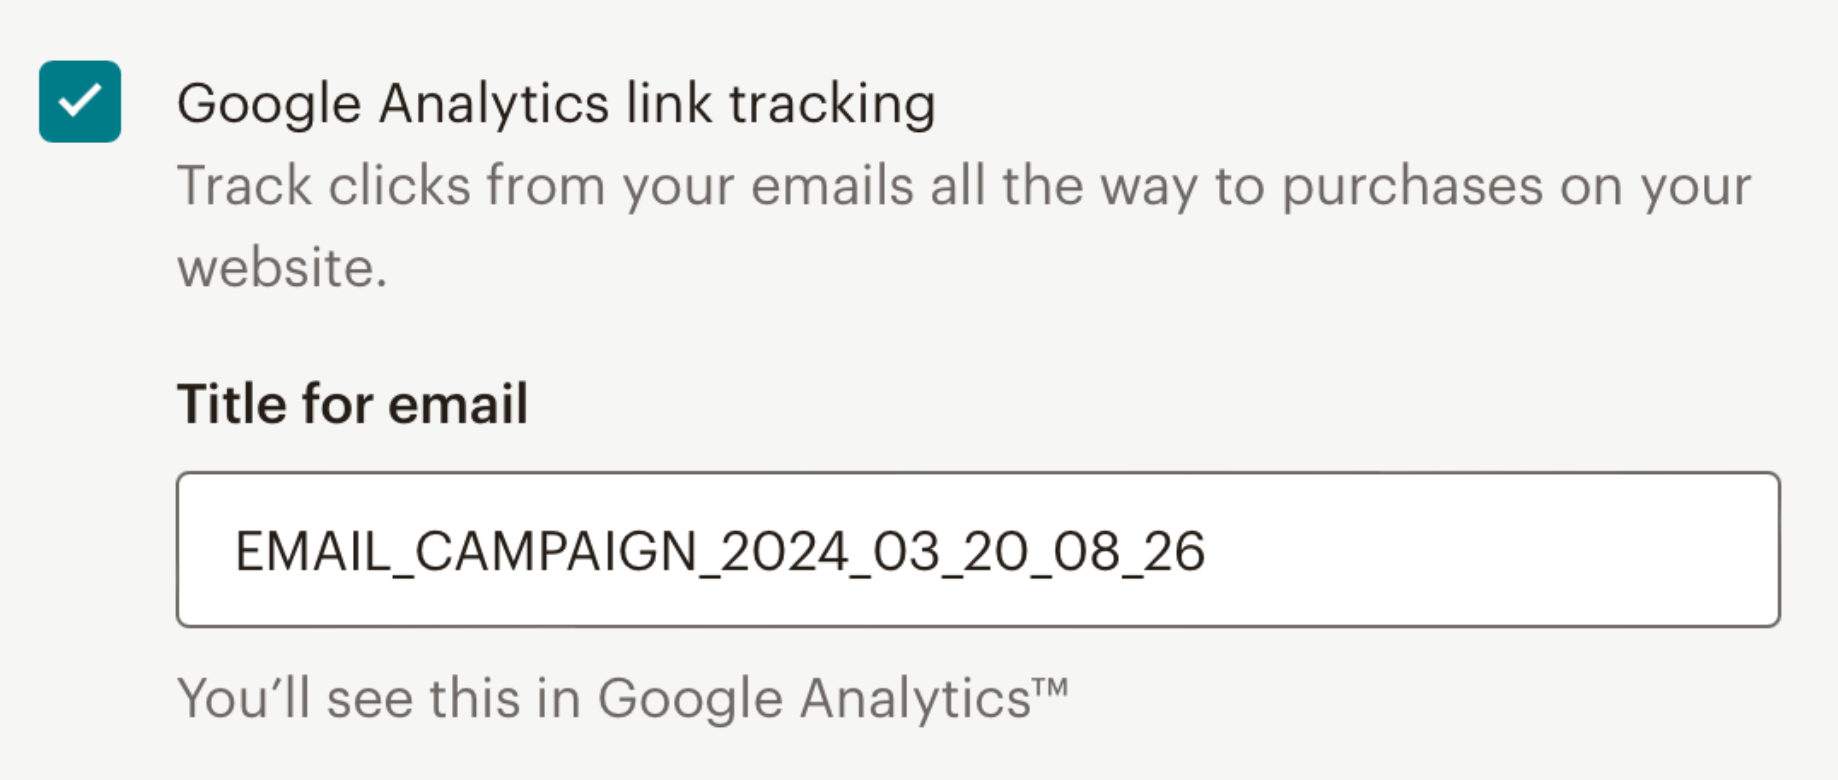 Automatic campaign tracking with GA integration.